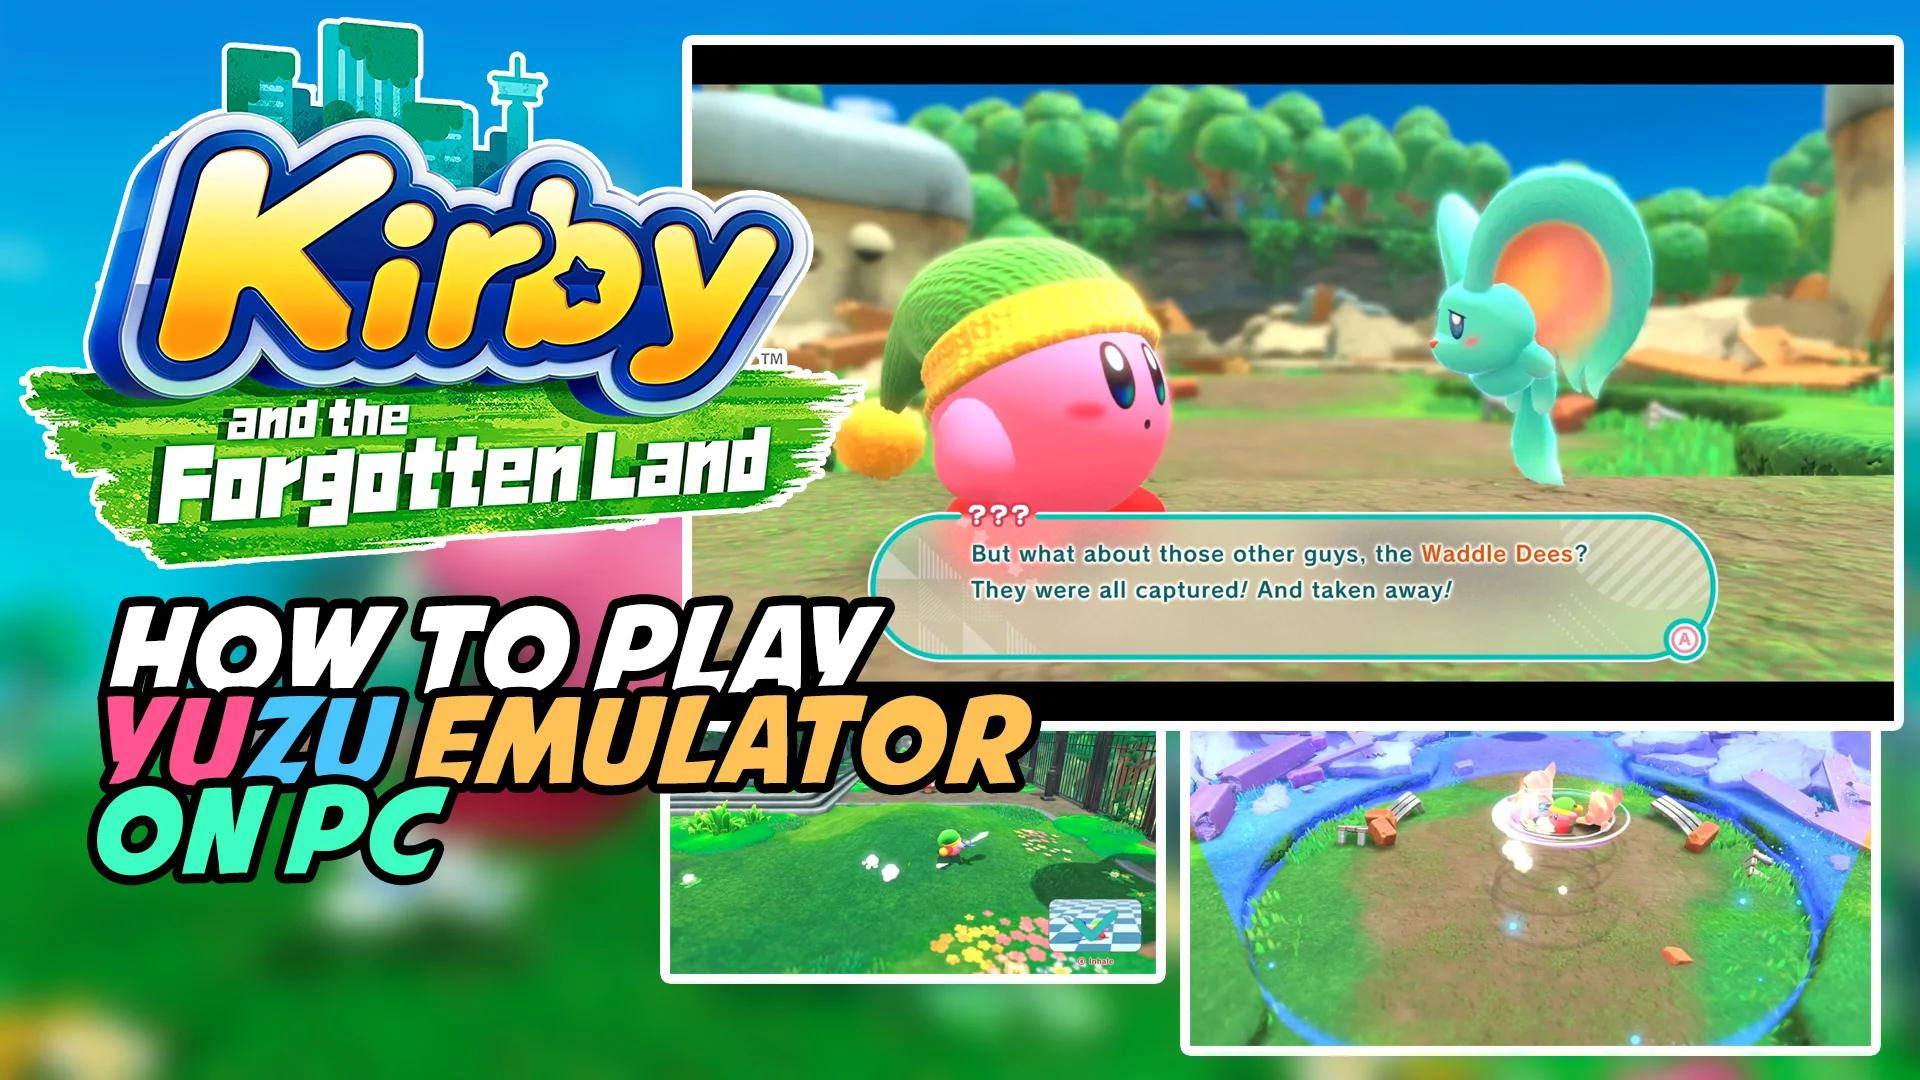 WORKING] How to Play Kirby And The Forgotten Land on Yuzu (Switch Emulator)  